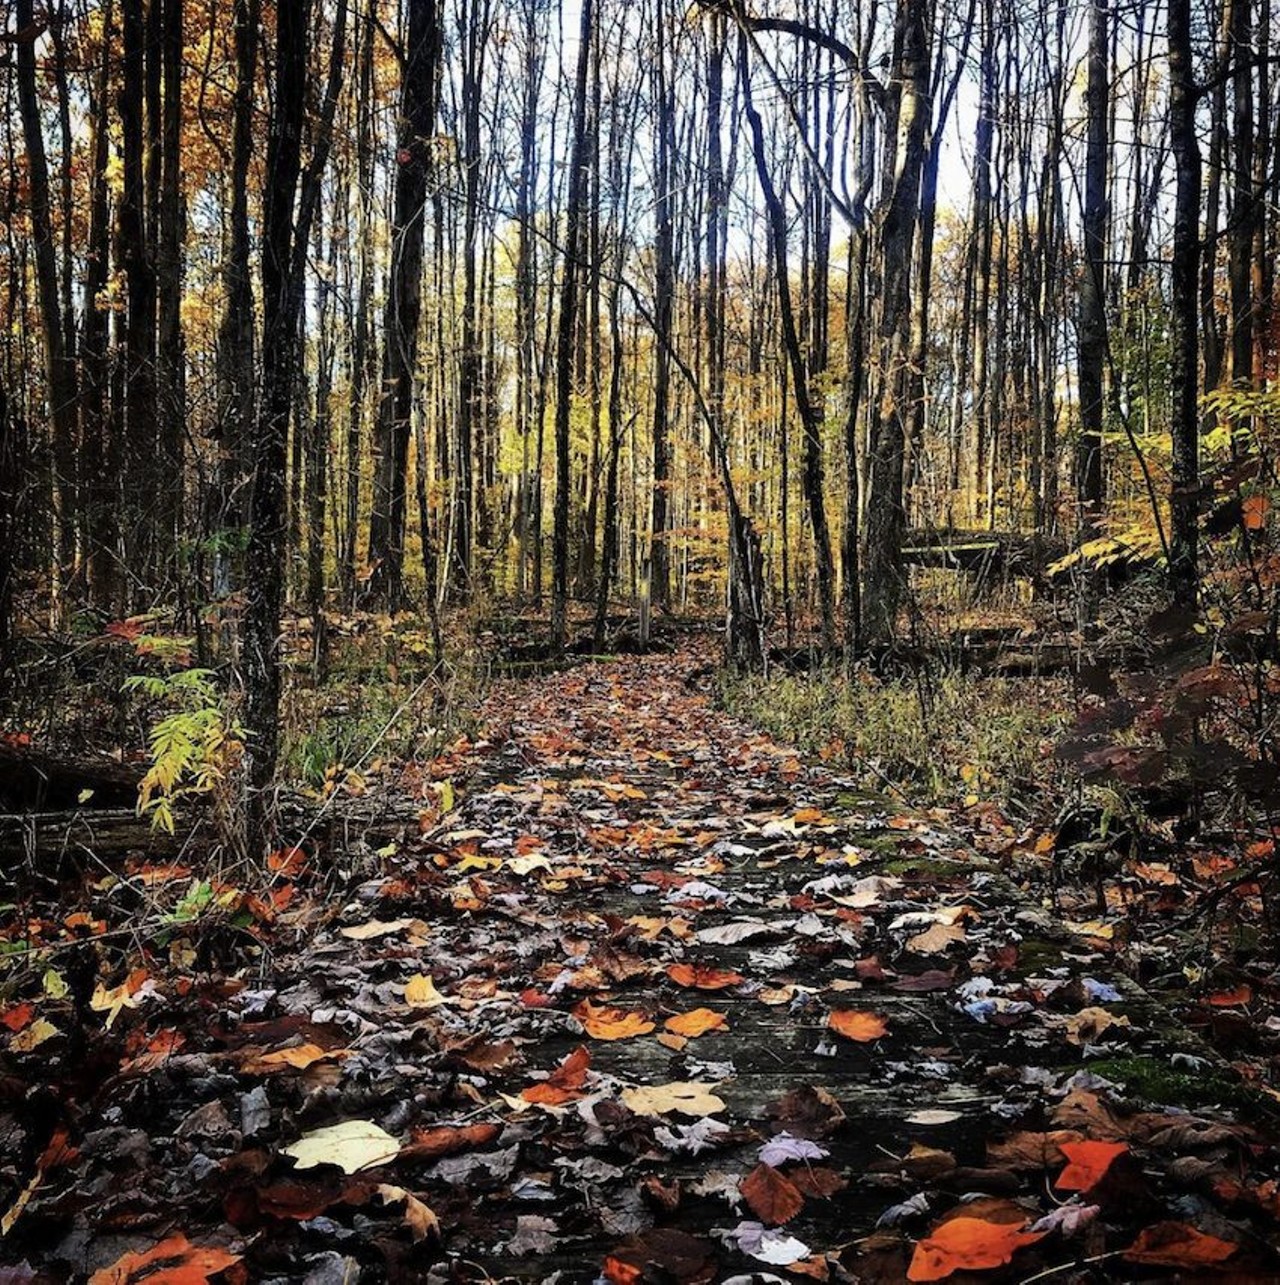 Augusta-Anne Olsen Nature Preserve
4934 W. River Rd., Wakeman 
This small nature preserve is a hidden gem, with several trails running through the forest and out to Vermillion Lake. Enjoy a quiet hike alongside the wildflowers that grow beside the trail. 
Photo via @NotAnsel27/Instagram